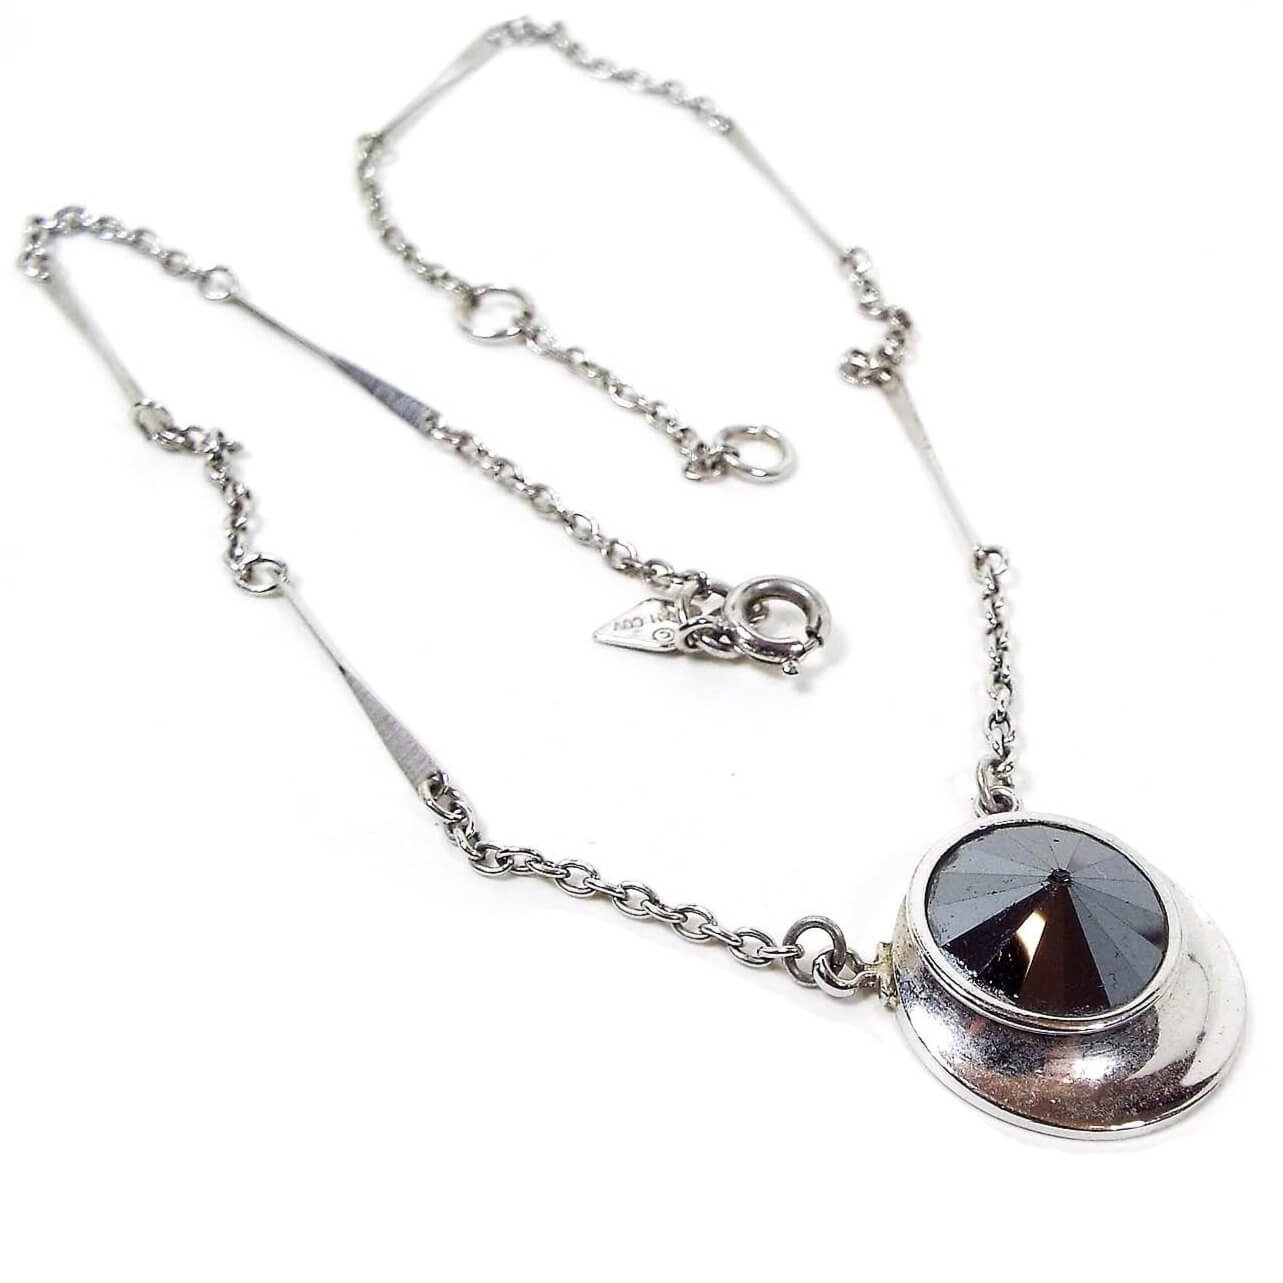 Front view of the retro vintage Sarah Coventry pendant necklace. The metal is silver tone in color. The pendant is oval shaped with a round rivoli rhinestone at the top. The rhinestone is metallic gray in color for a faux hematite appearance. There is a spring ring clasp at the end with two rings on the chain to clasp it to for size. There is a Sarah Cov hang tag by the clasp.